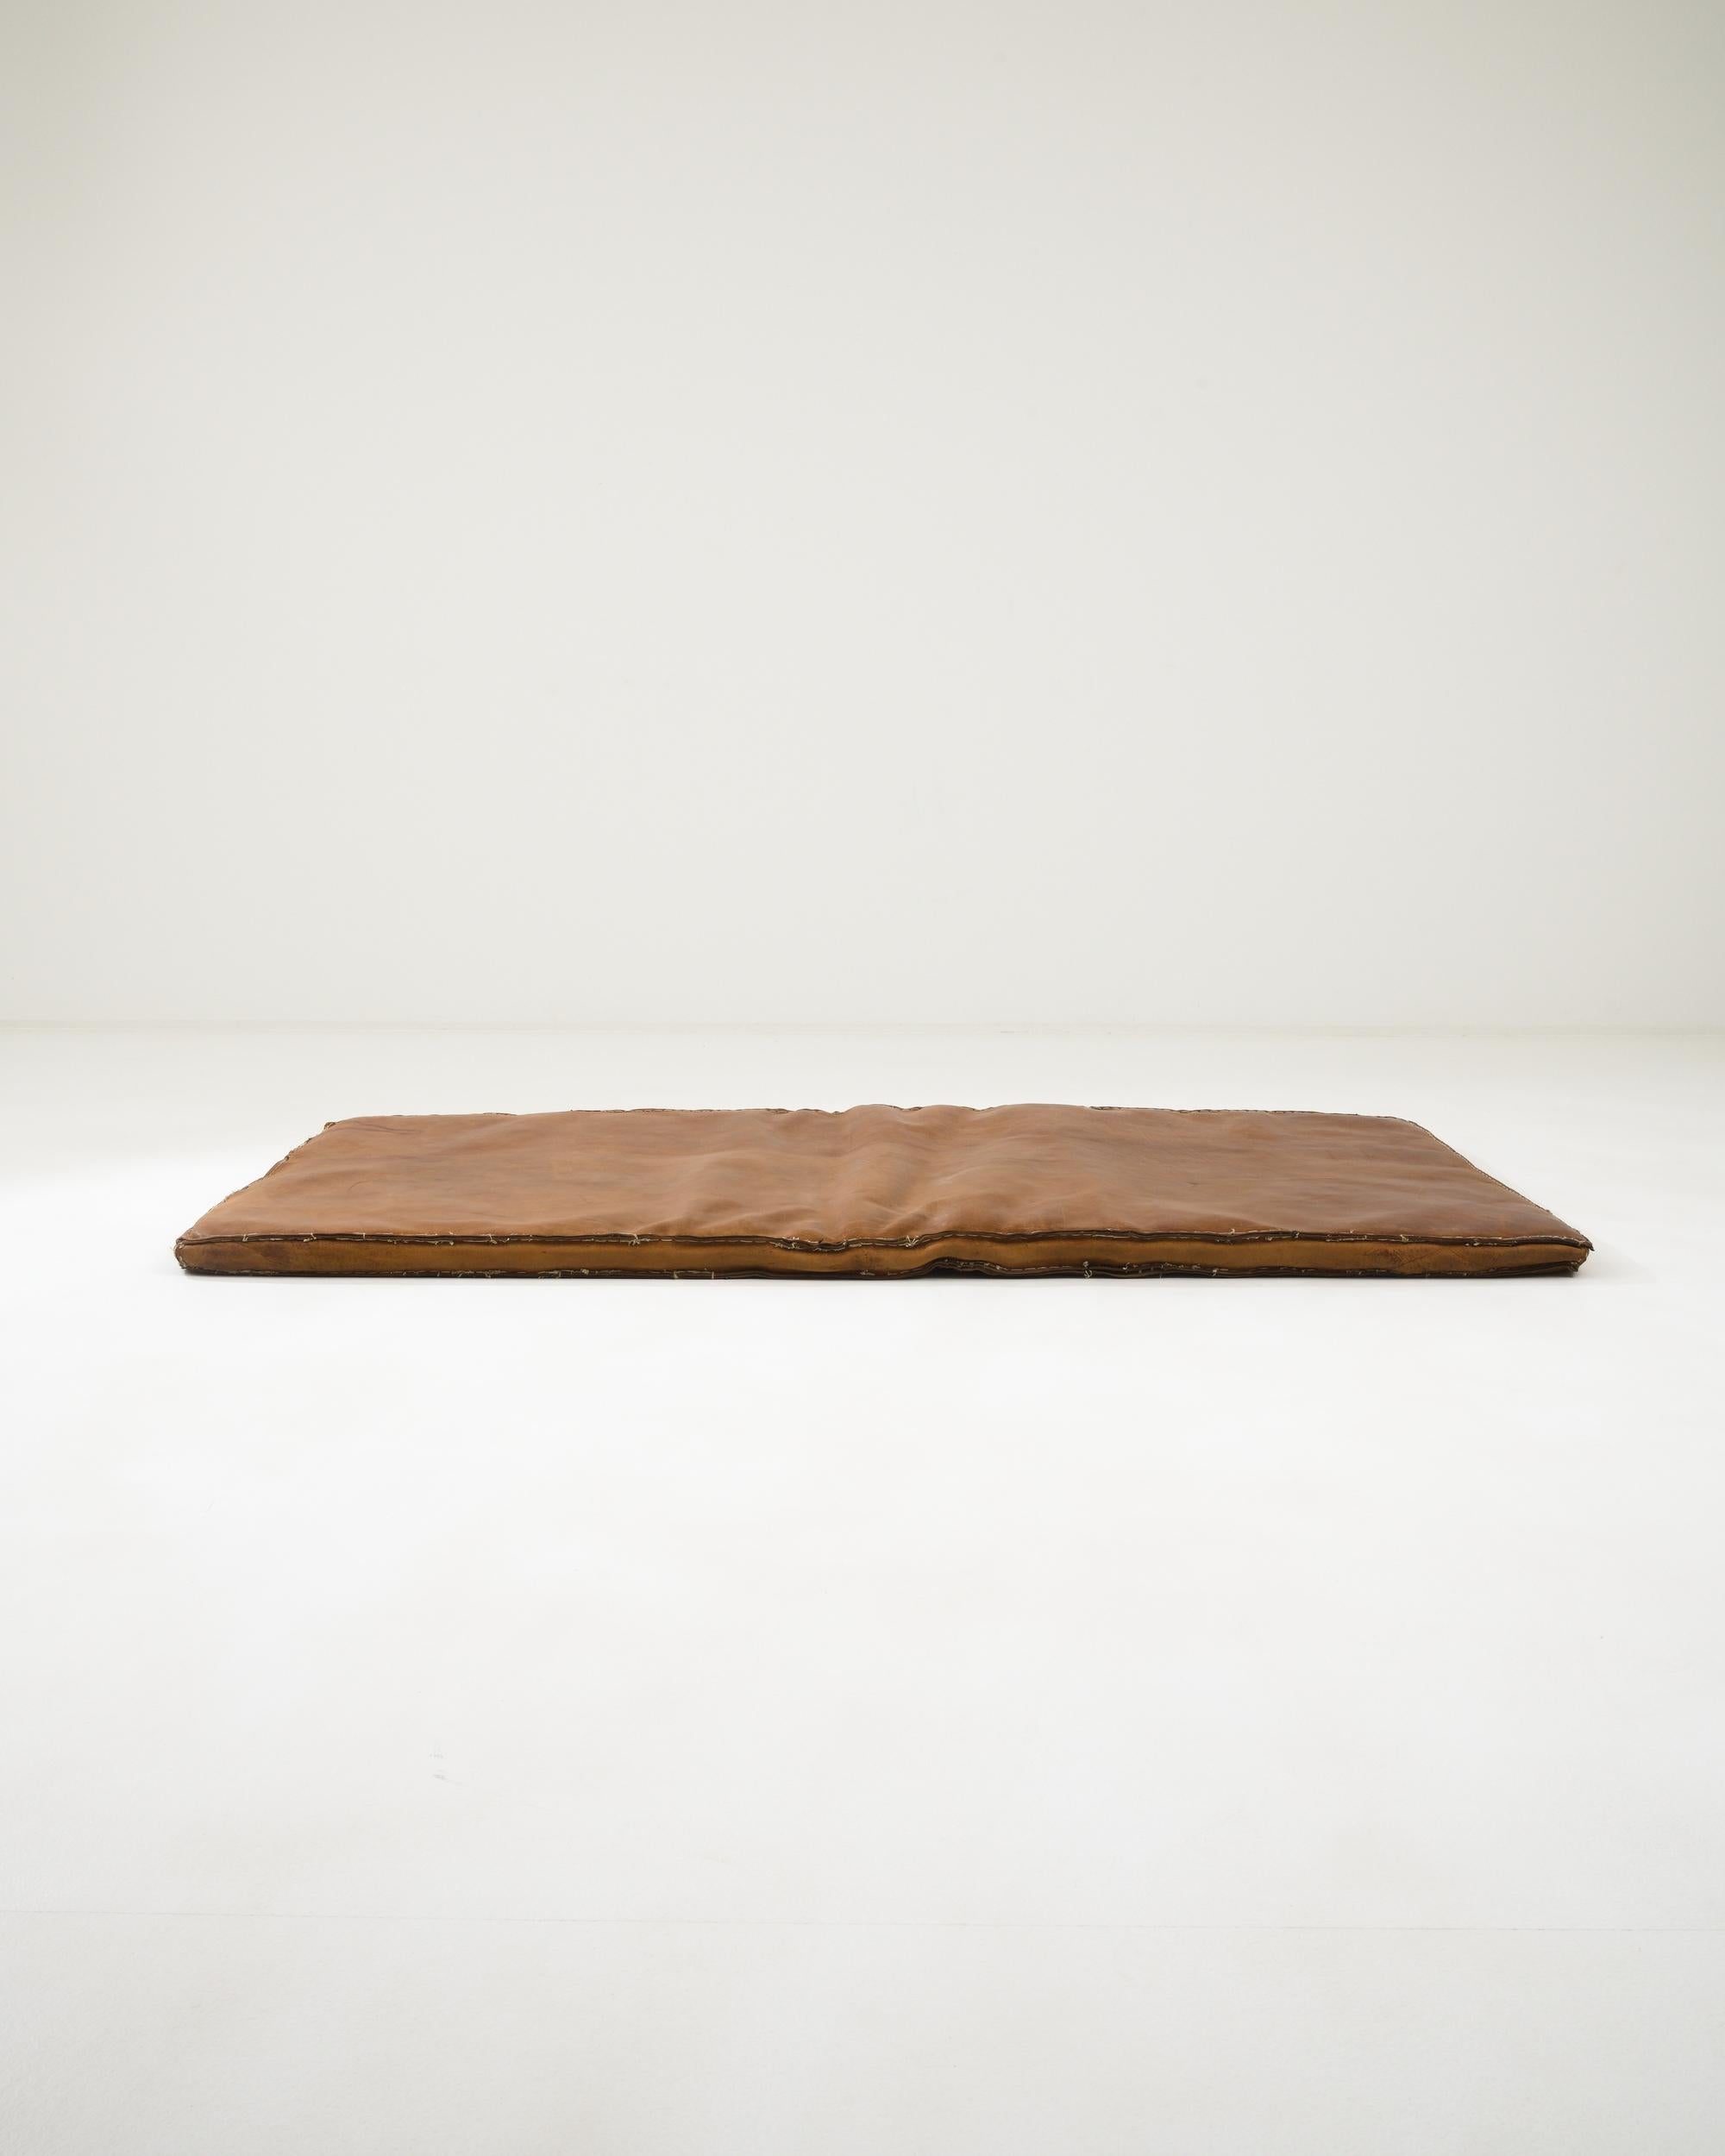 This unique mattress was handcrafted in the Czech Republic during the 20th century. The bold stitches along its edges infuse it with a distinctive character, while the caramel hue of its high-quality leather exudes a sense of warmth and coziness.